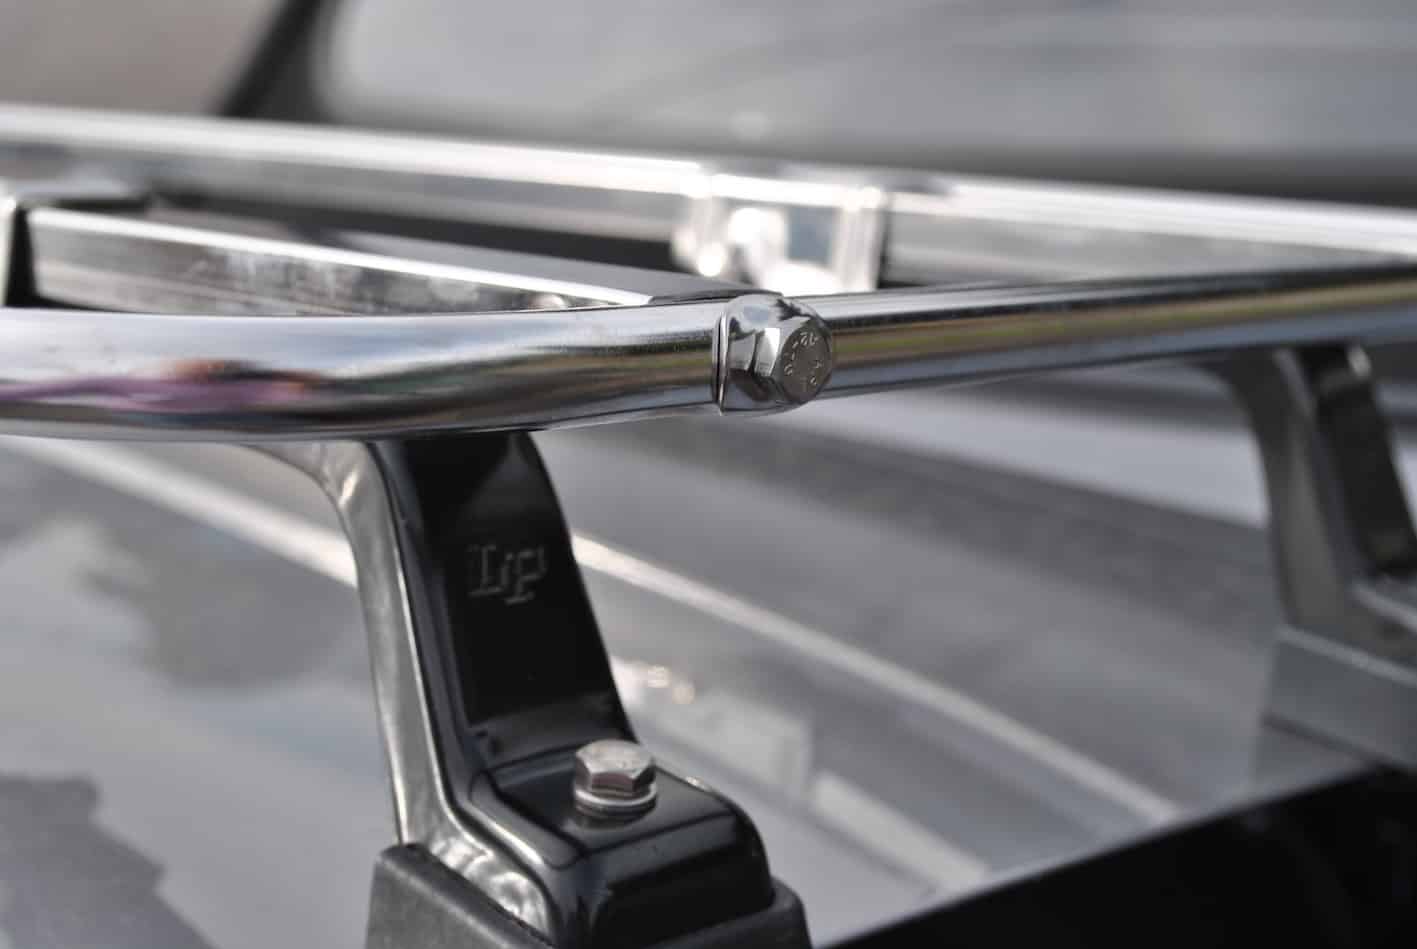 close up of a bmw z3 luggage rack showing the detail of the rack